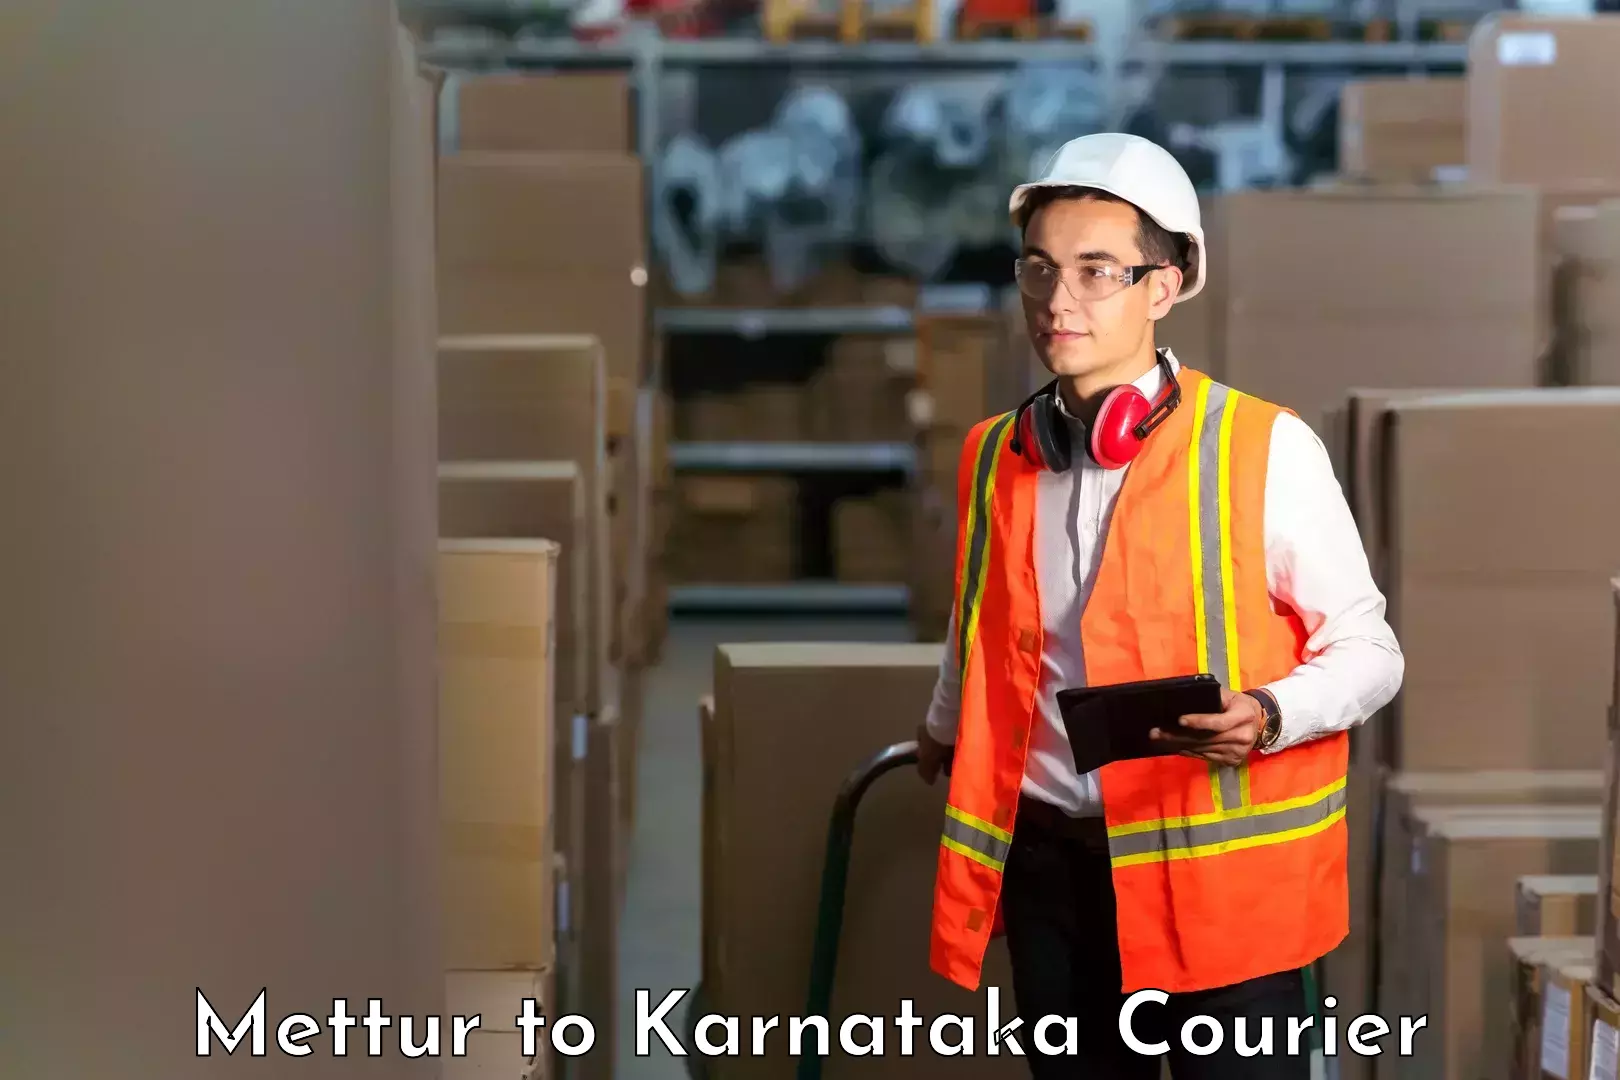 State-of-the-art courier technology Mettur to Madikeri